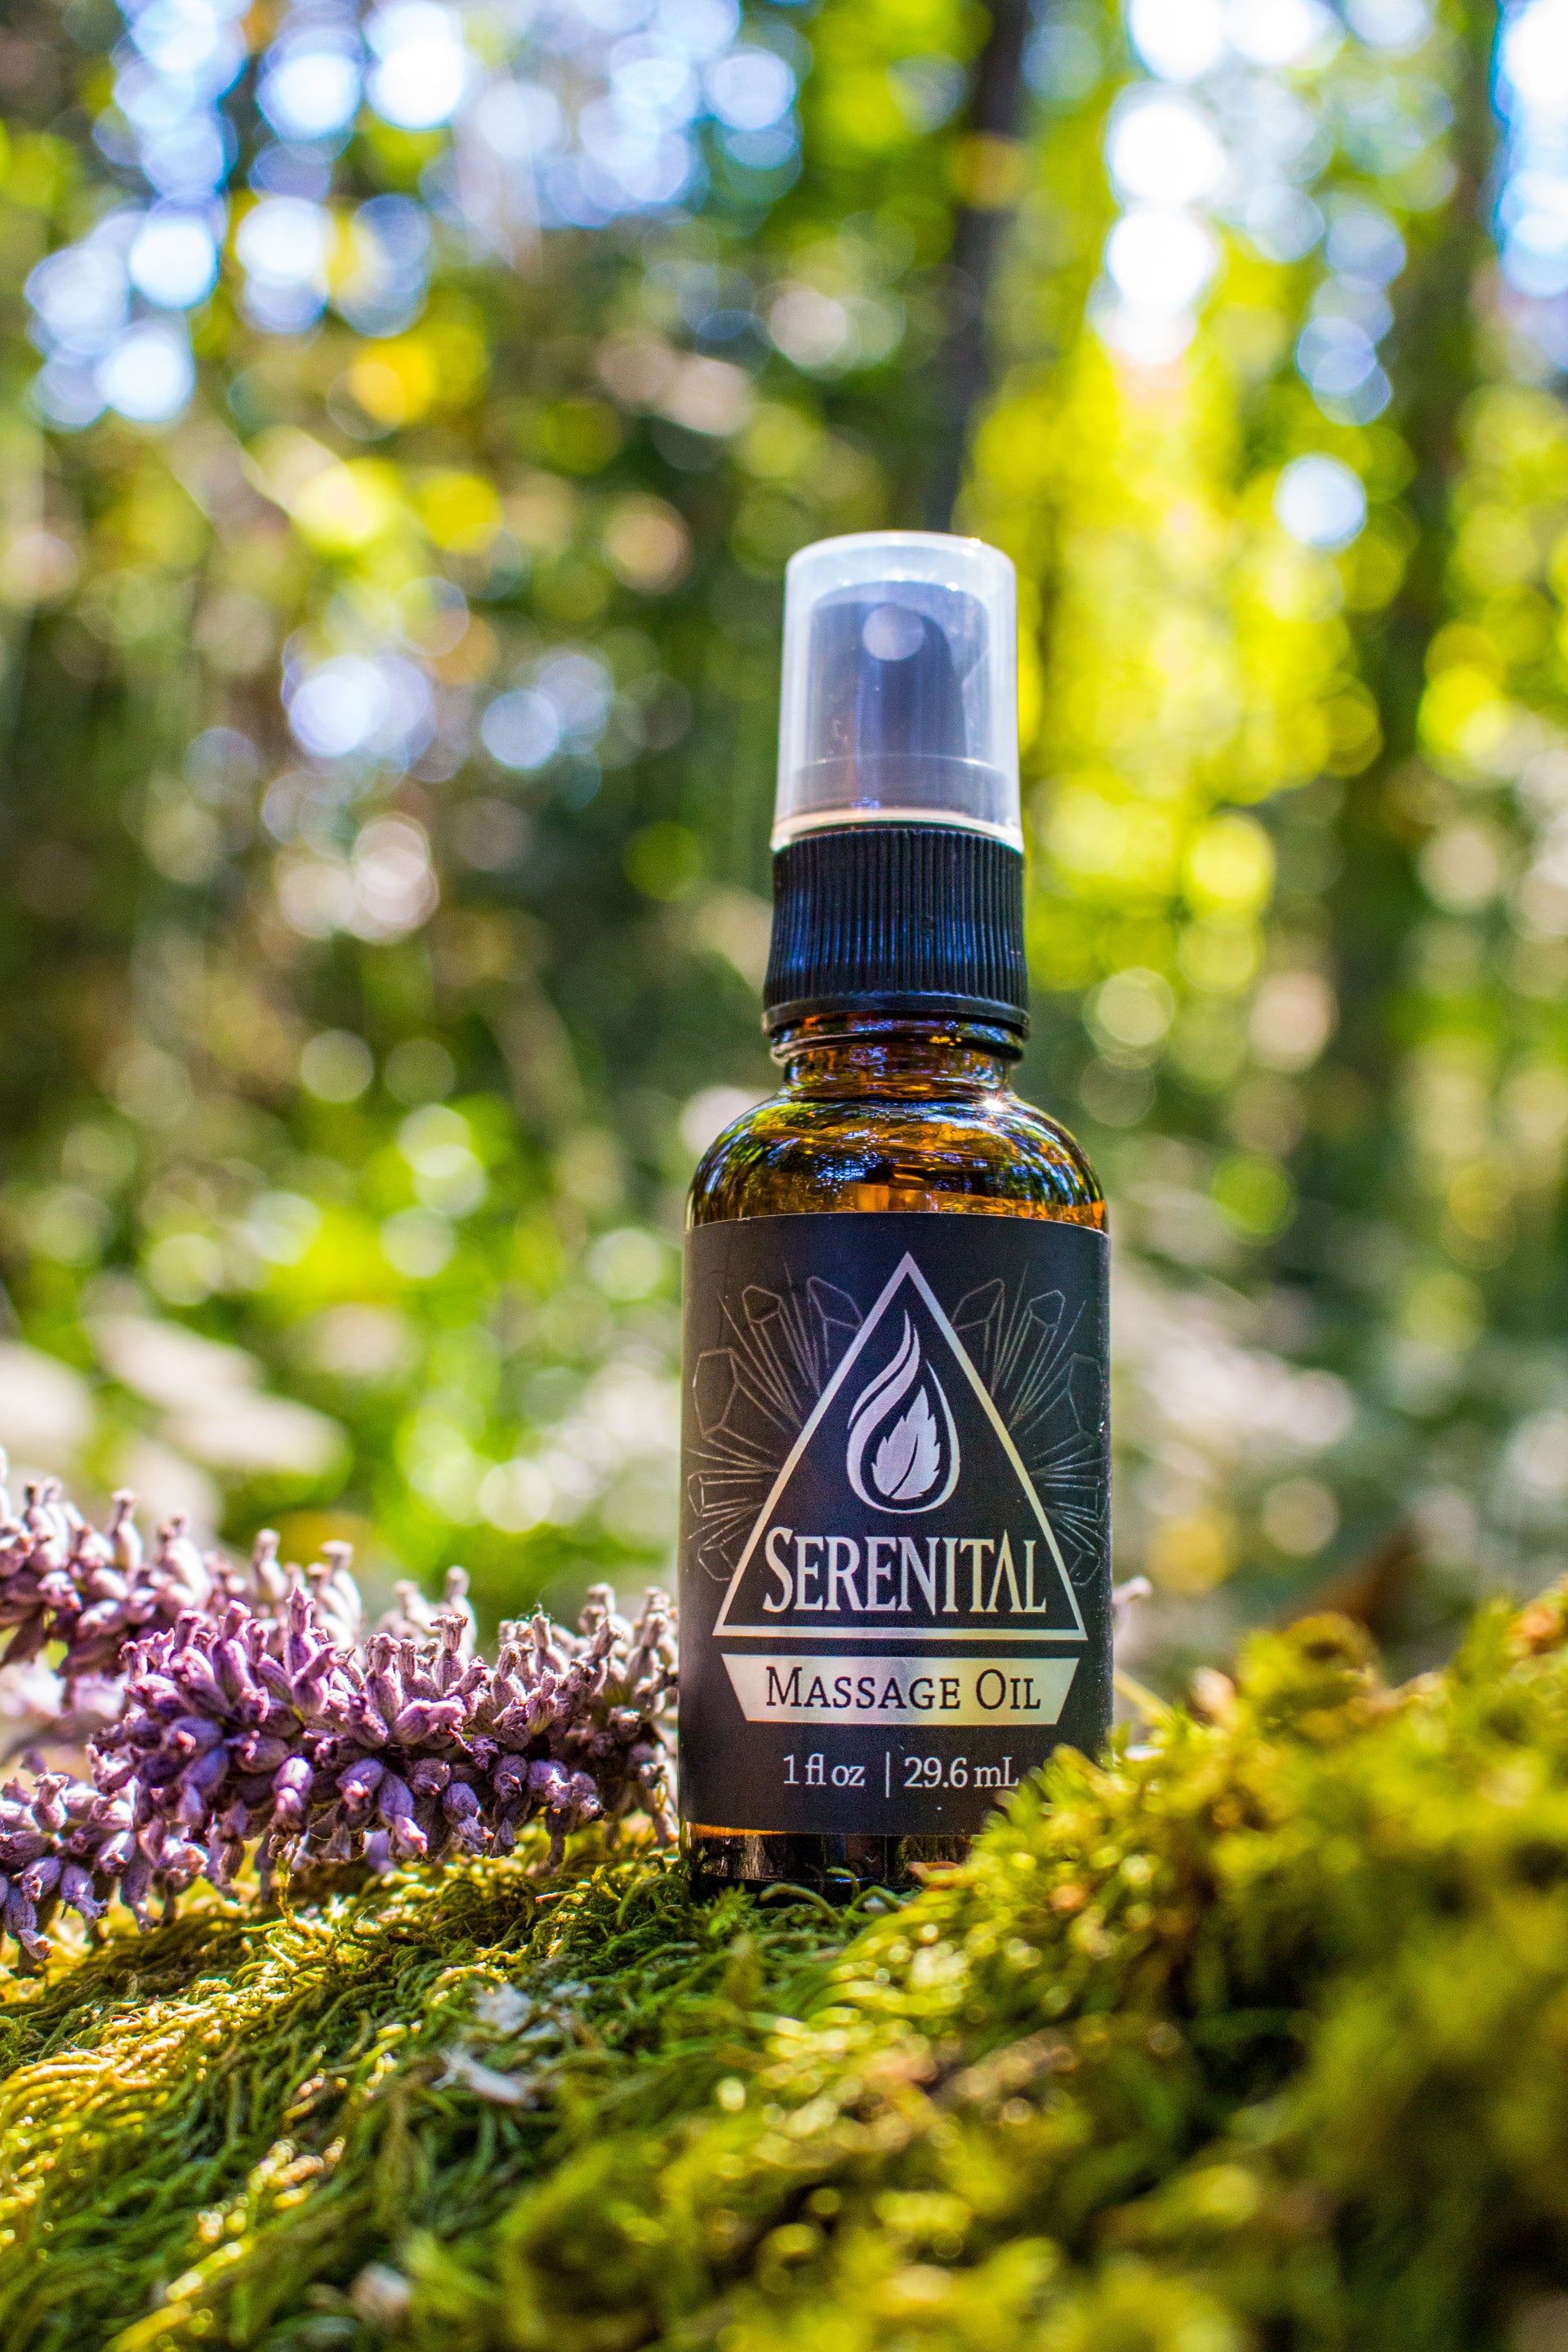 A bottle of Serenital CBD Massage Oil sits on a mossy log in the sunshine with a lavender bloom next to it.